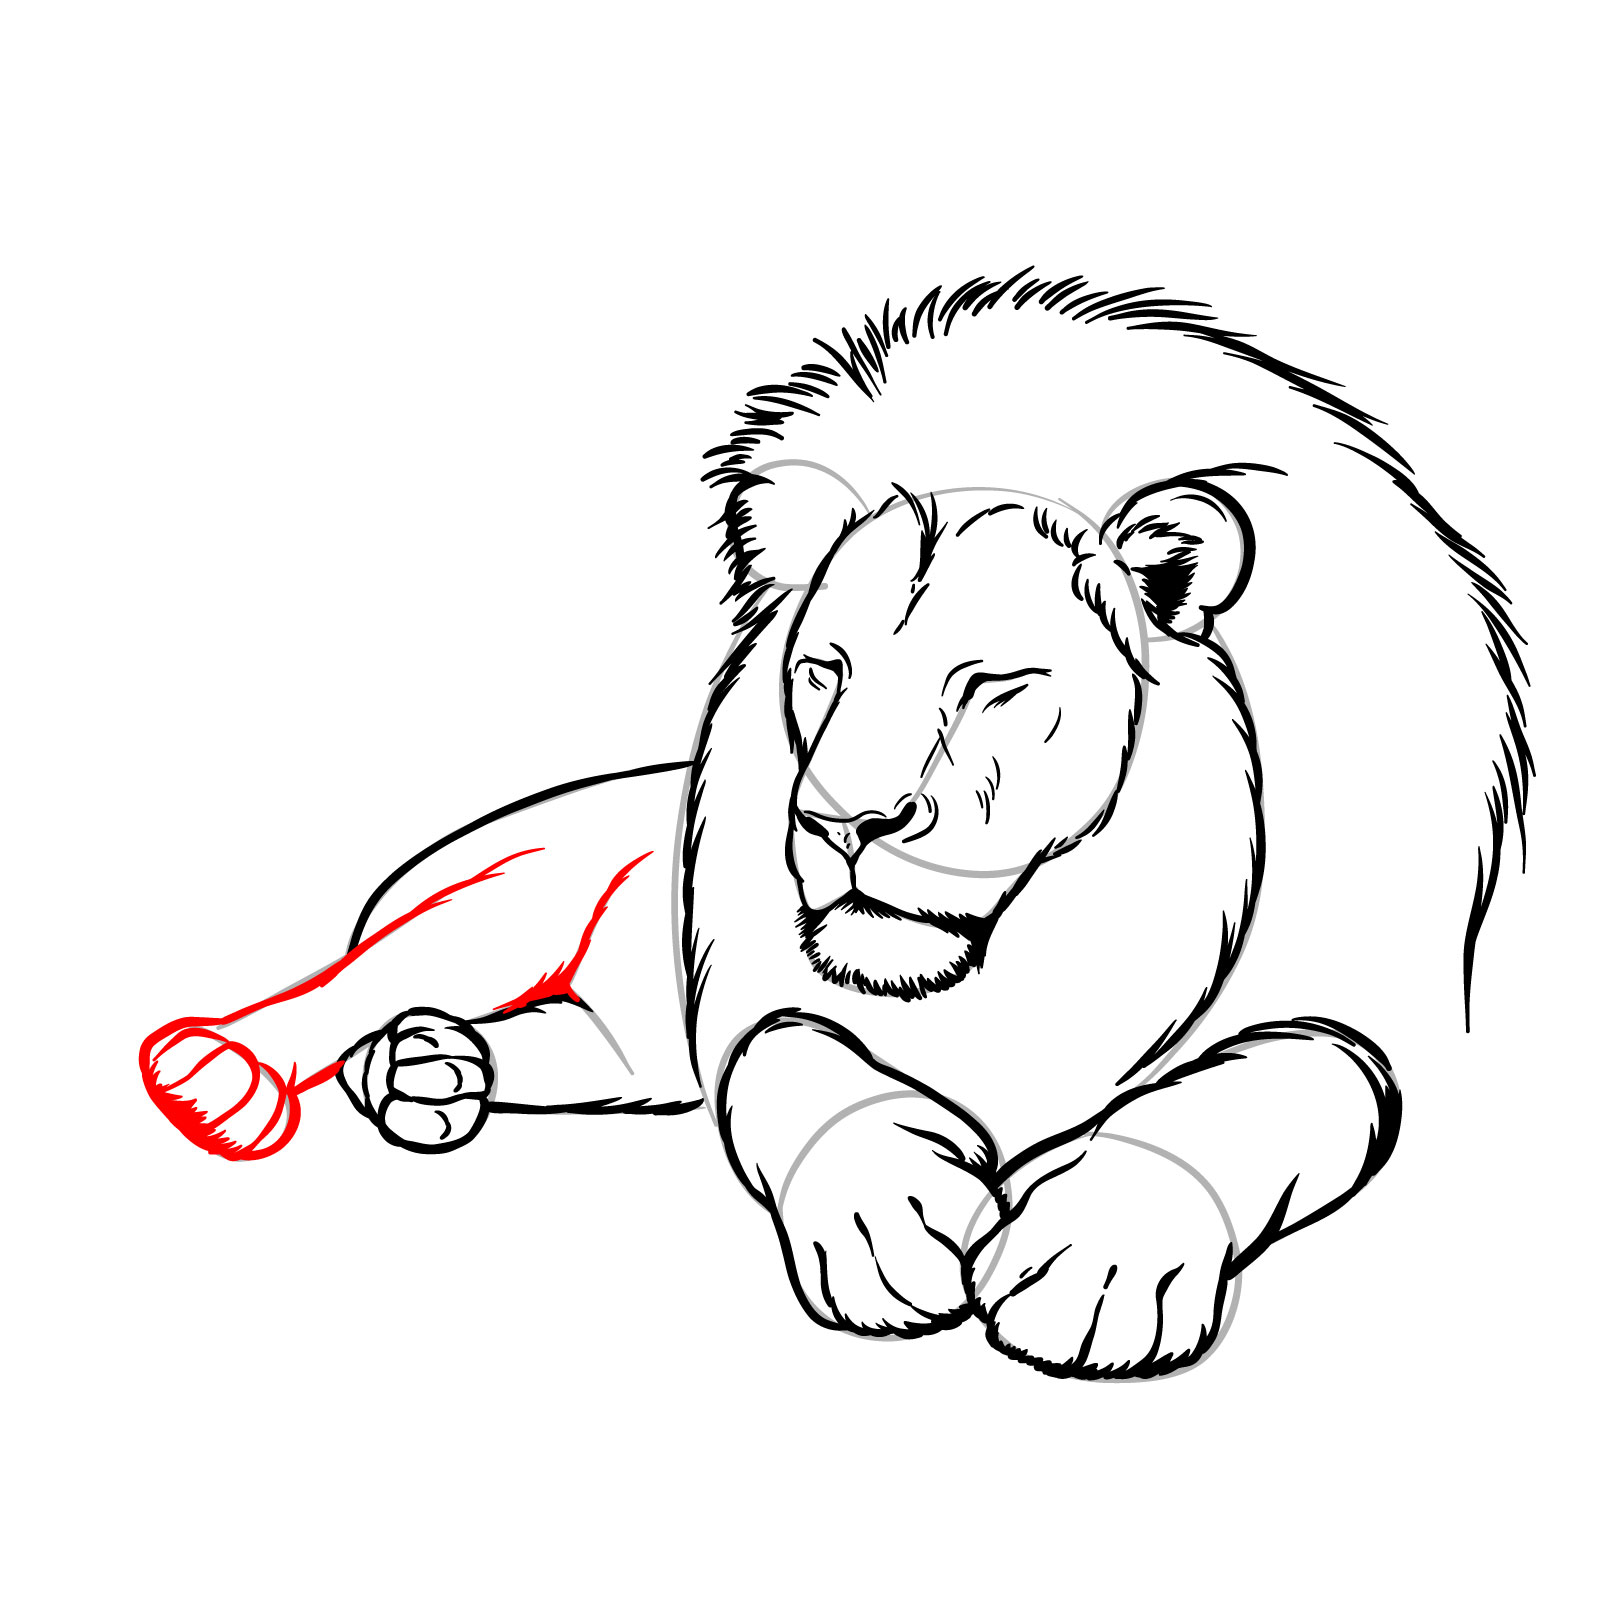 How to draw a sleeping lion in front view - Step 13: Adding the second rear leg